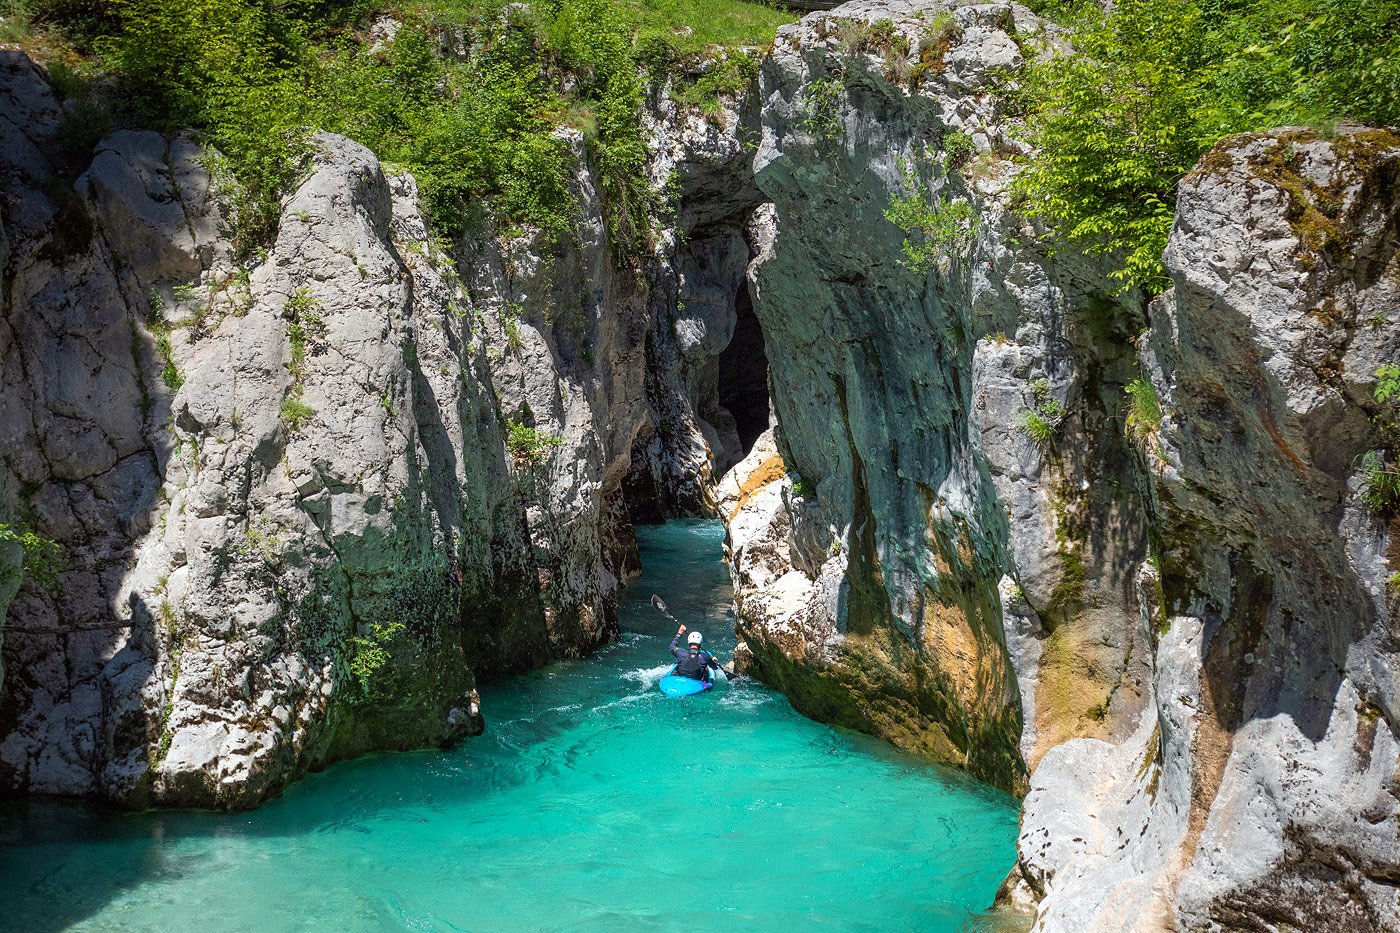 The kayaker paddles upstream towards the Great Soča Gorge